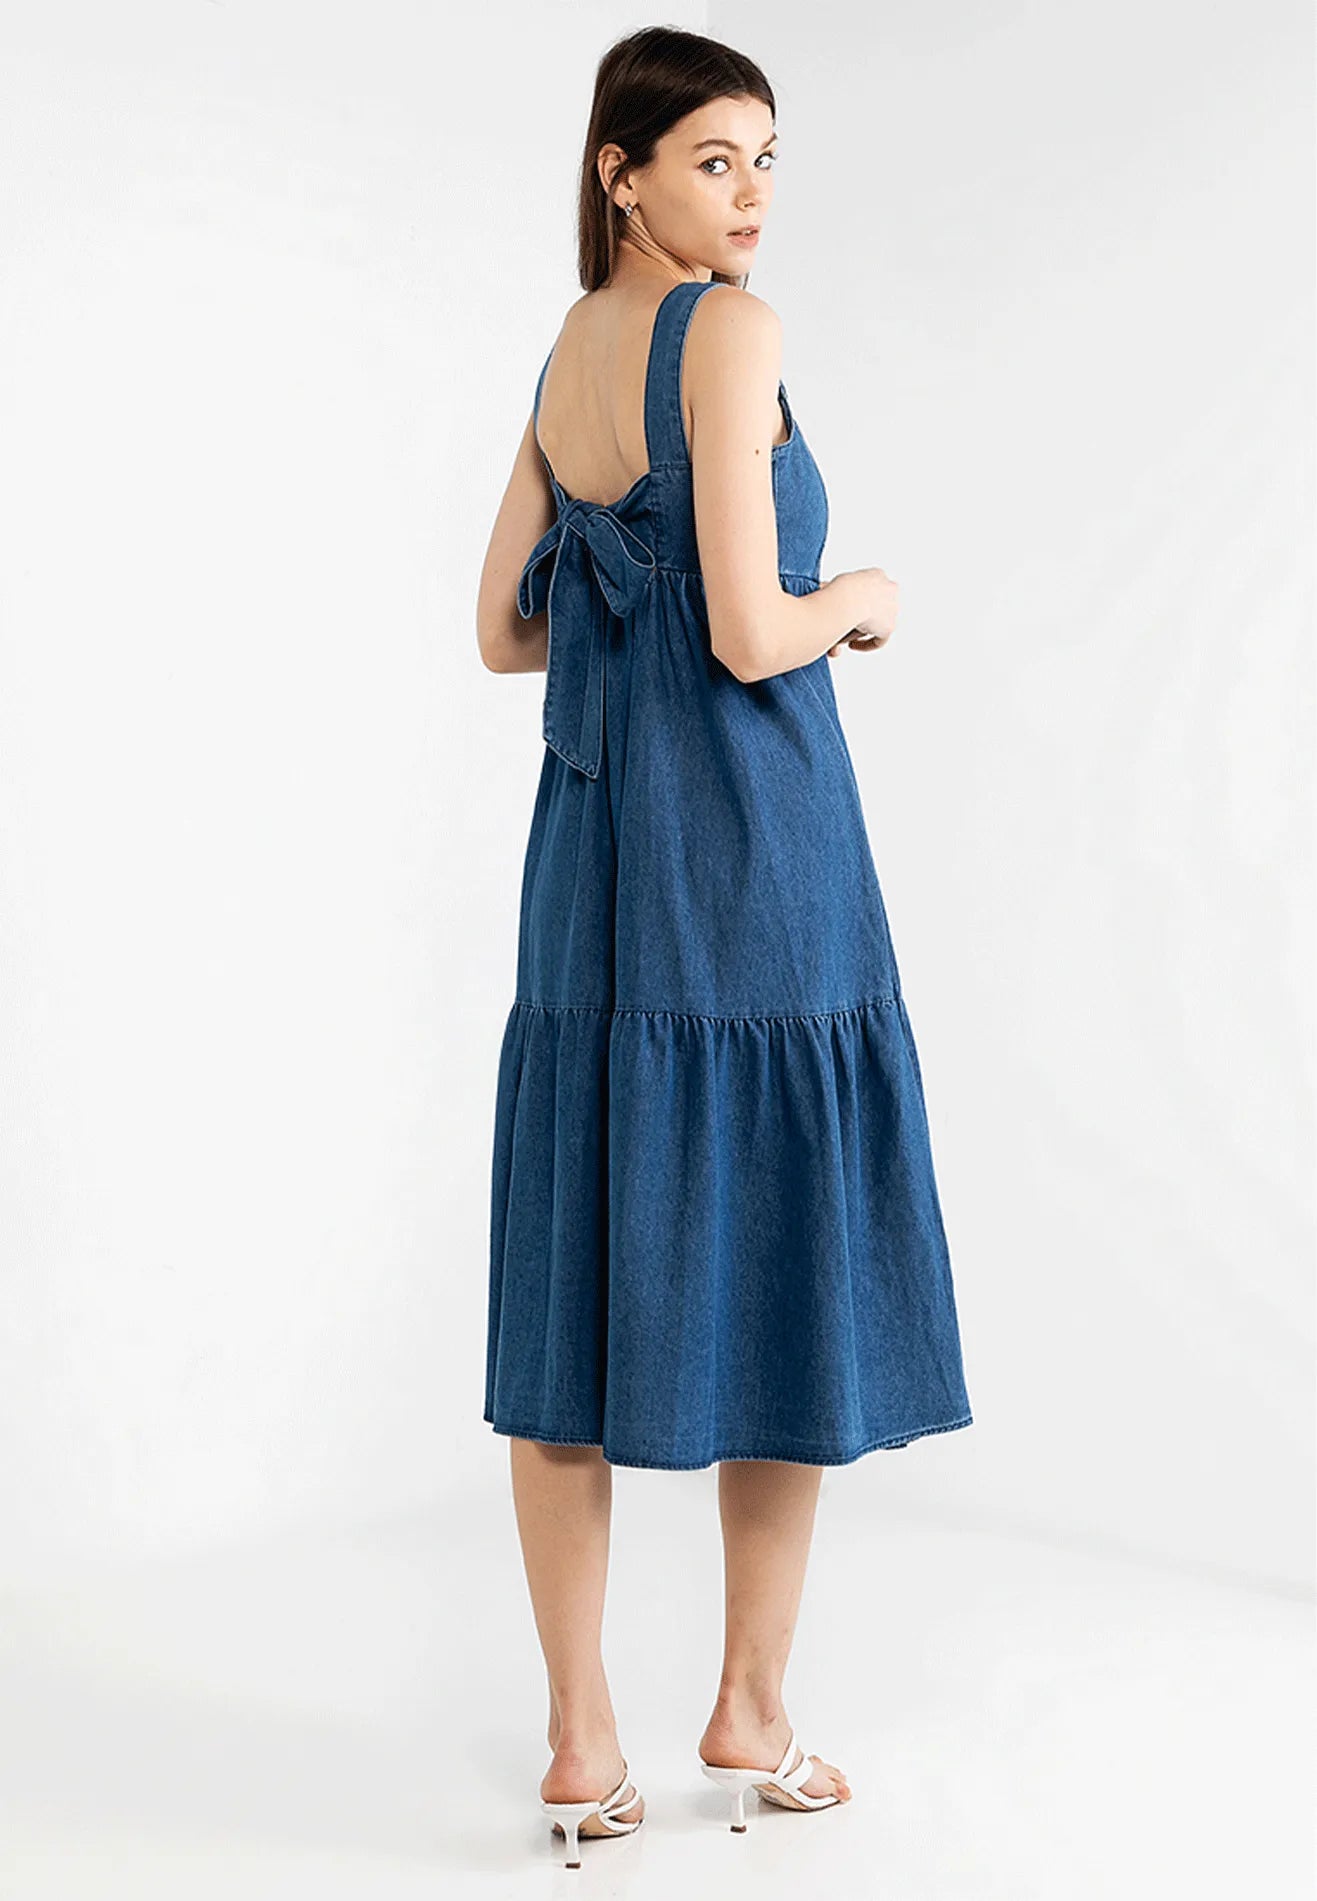 VOIR JEANS Hey Summer Collection: Square Neck Back Ribbon Tie Maxi Dress